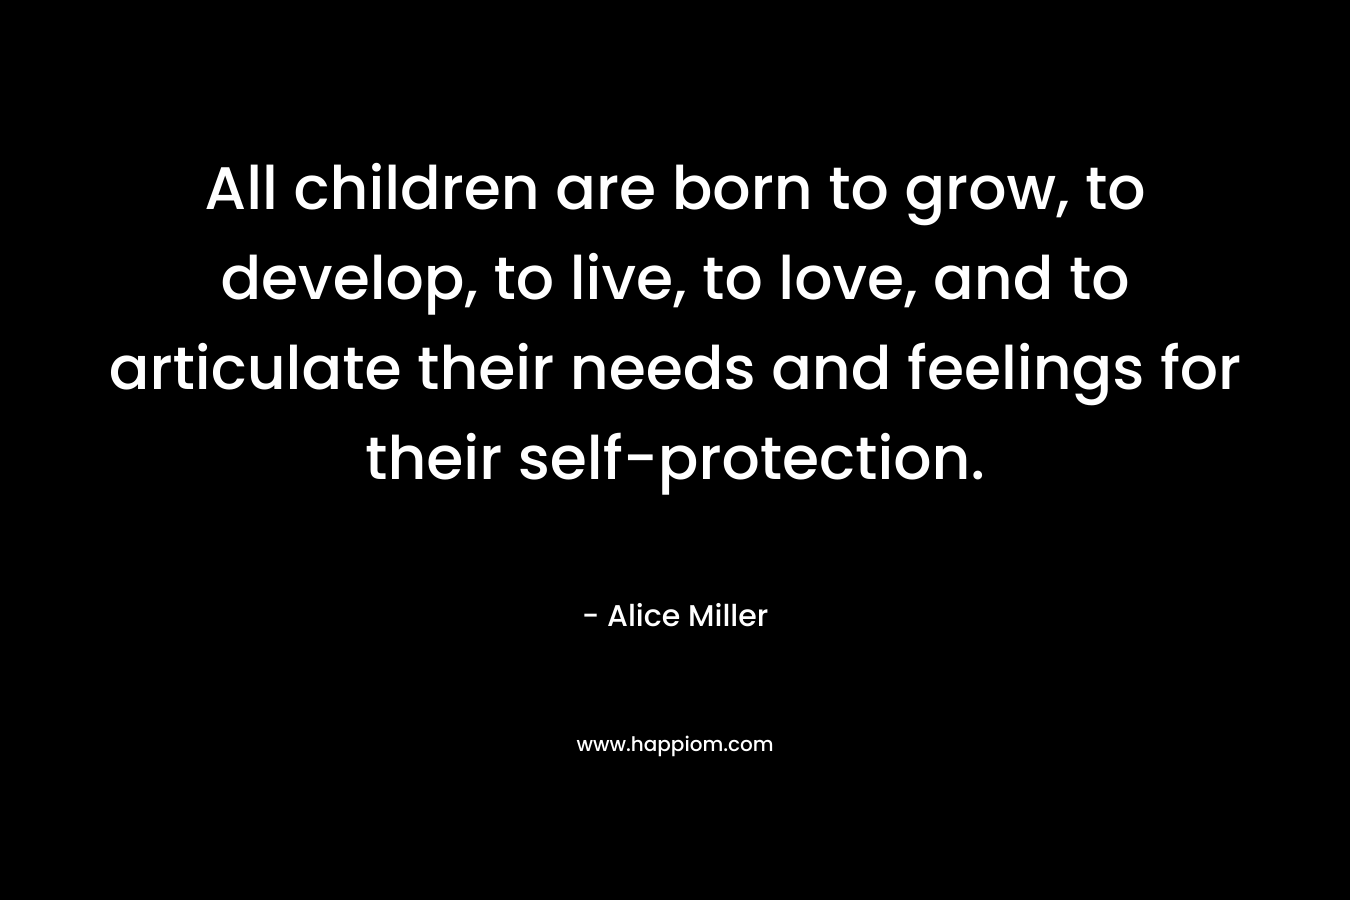 All children are born to grow, to develop, to live, to love, and to articulate their needs and feelings for their self-protection.